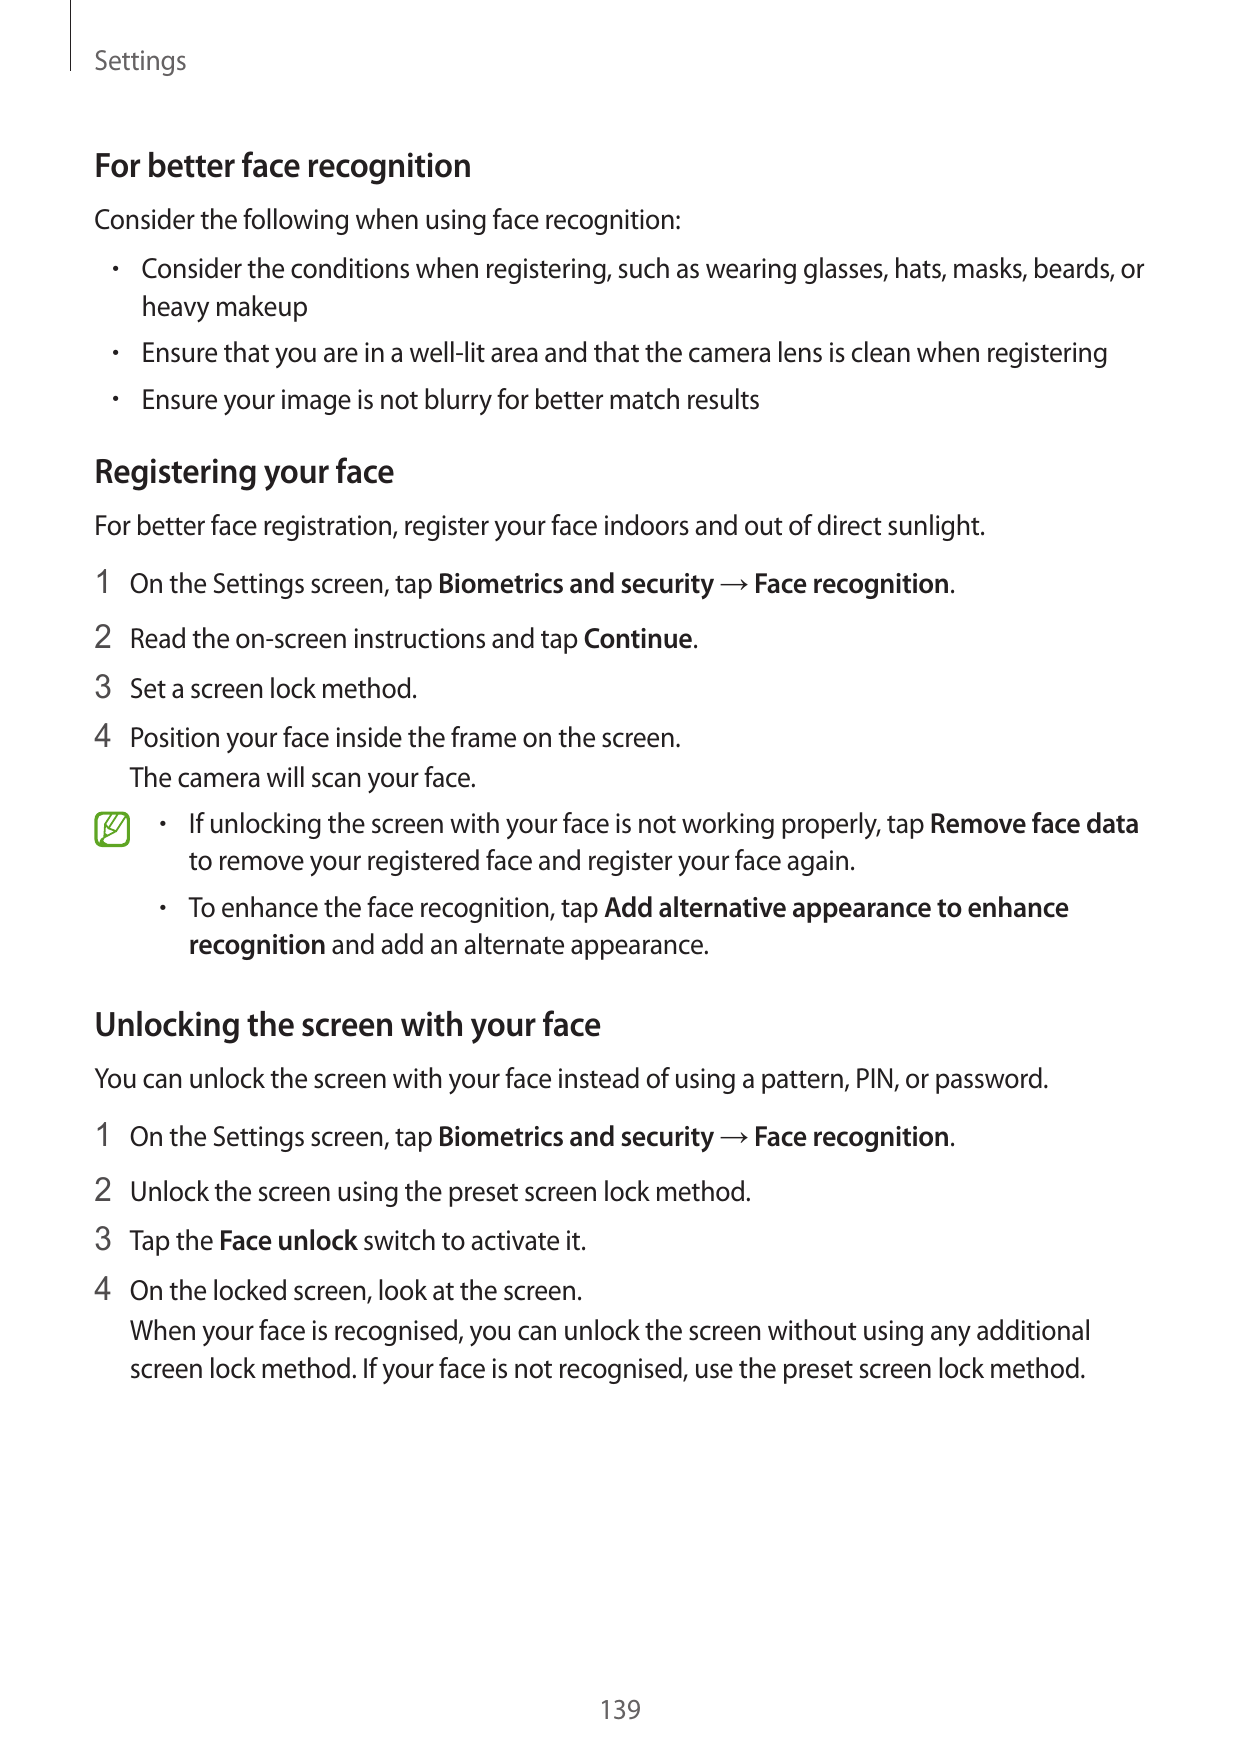 SettingsFor better face recognitionConsider the following when using face recognition:• Consider the conditions when registering